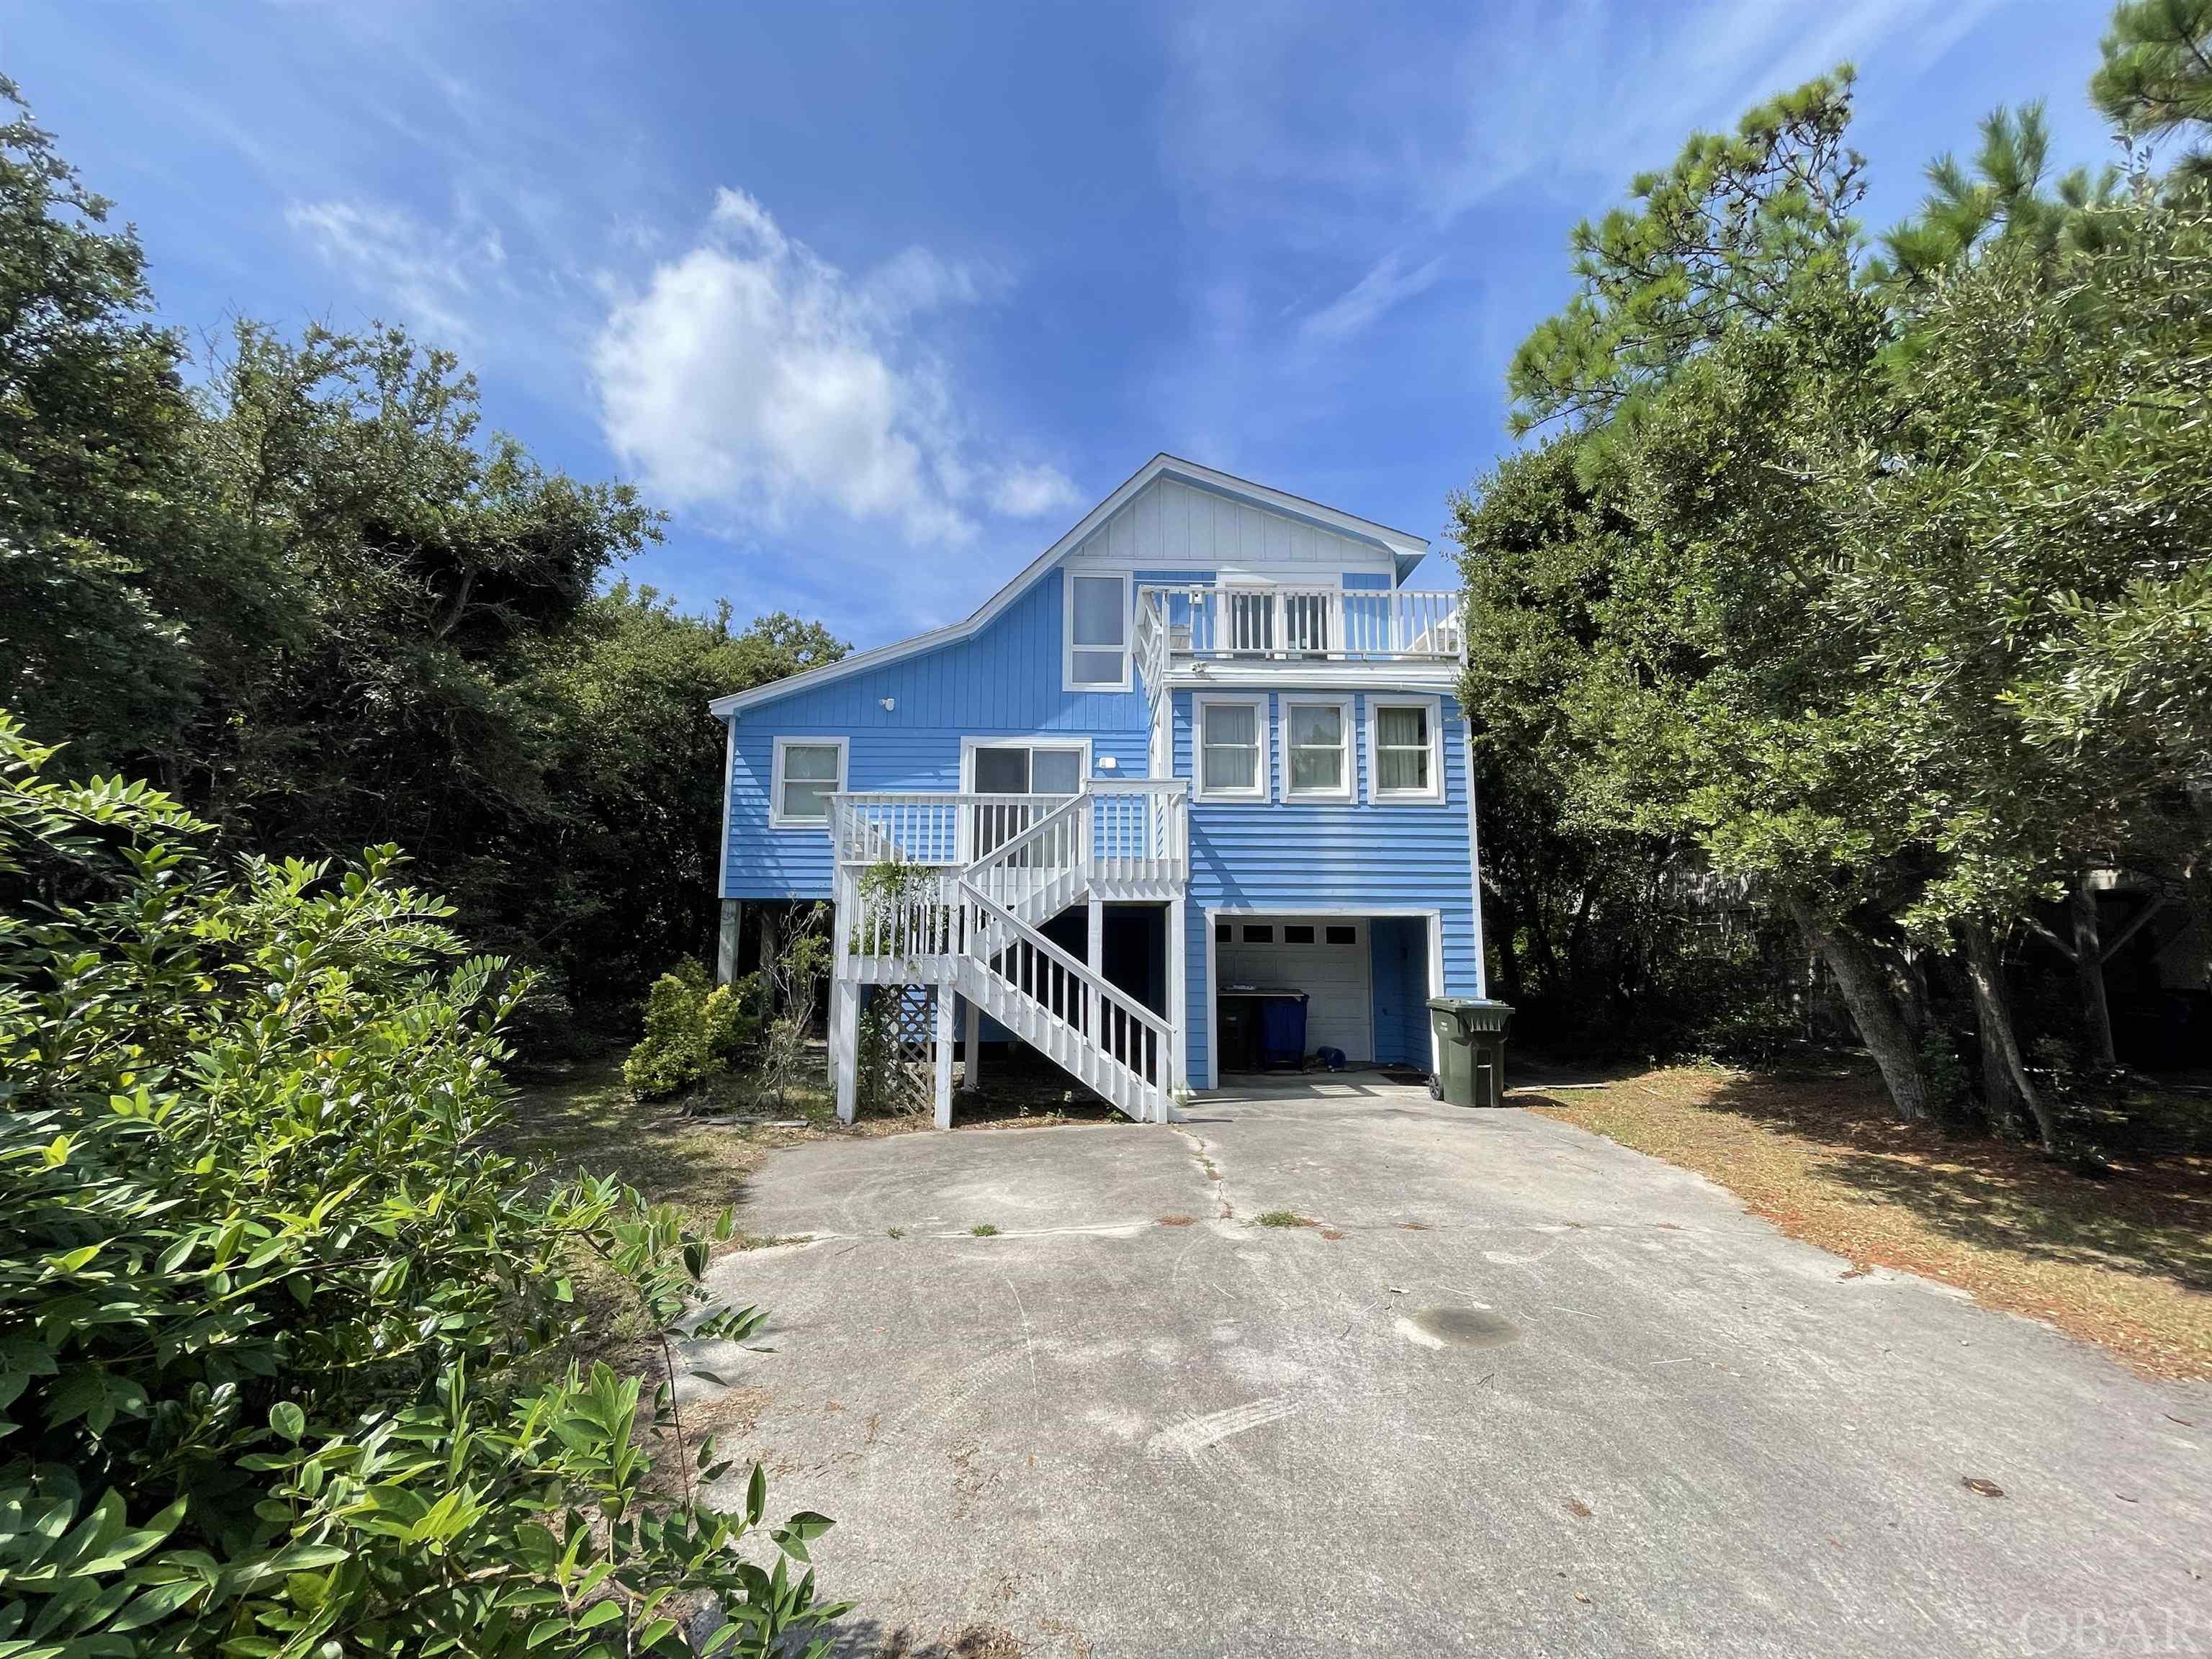 This home is in a perfect between the highways location in Nags Head. Close to Nags Head pier and some very popular restaurants. It has been sitting vacant for some time and is in need of some TLC.